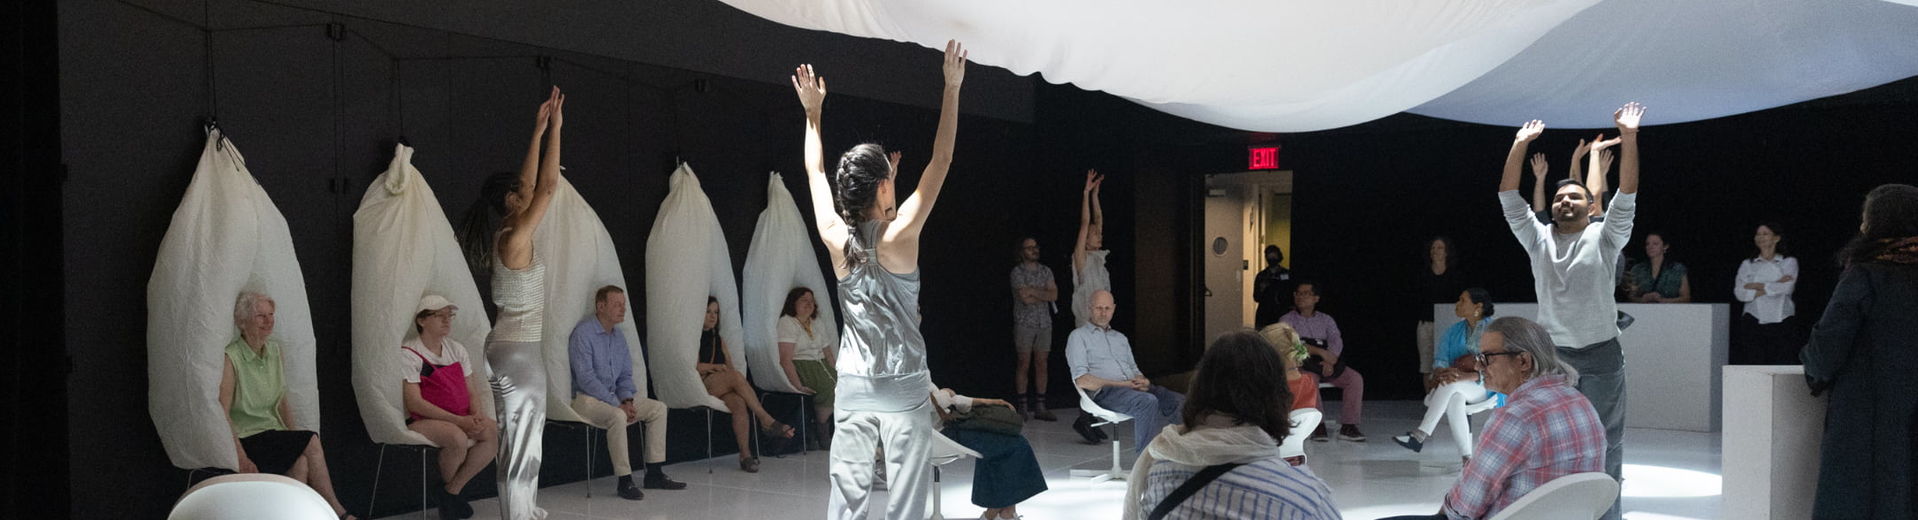 Rhythm Bath performance space with dancers and viewers under billowing white fabric